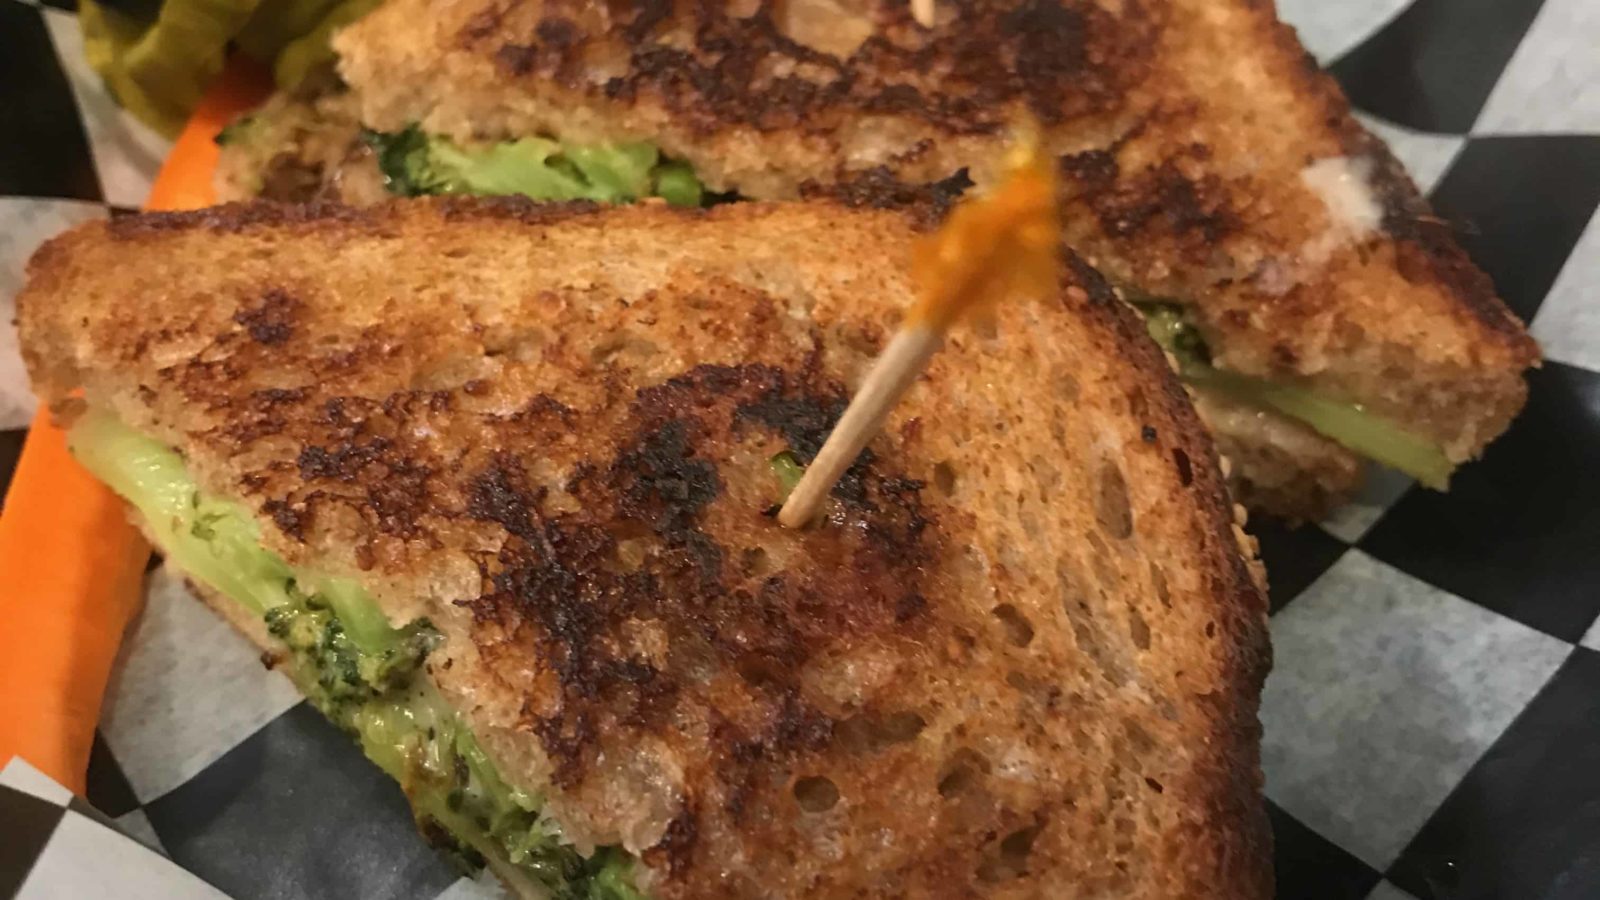 Brew Haha café and coffee shop in North Adams offers grilled cheese sandwiches on local sourdough bread.